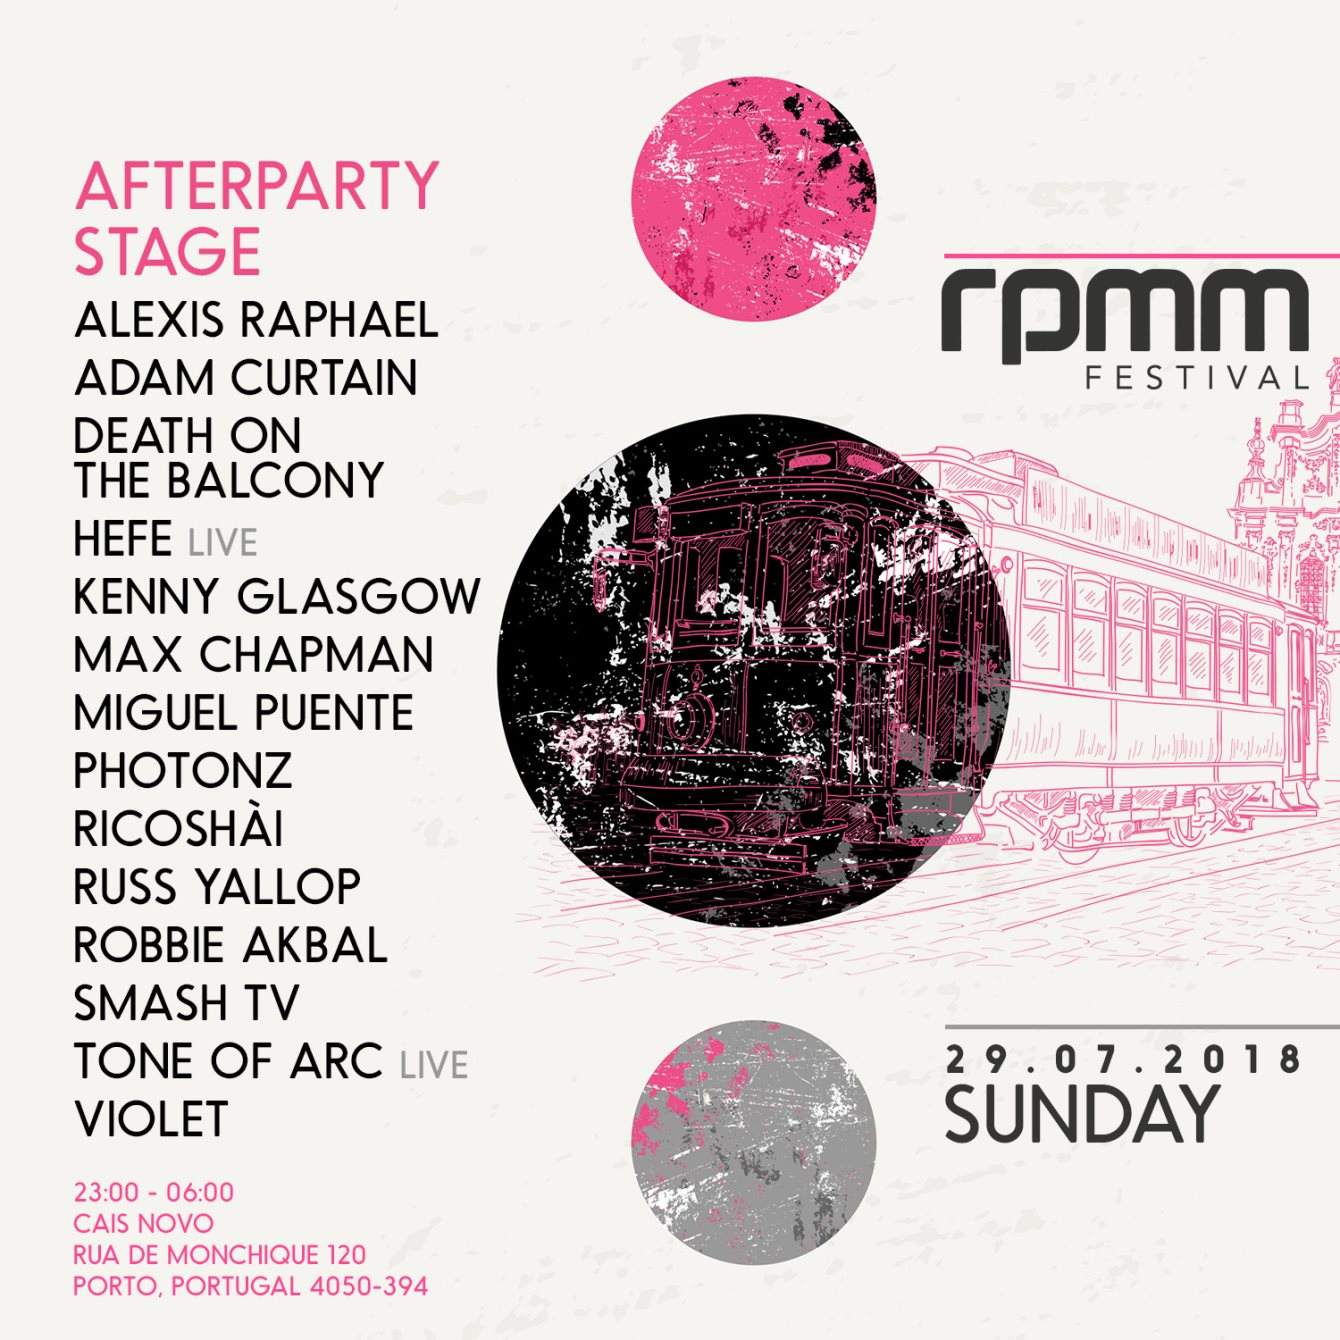 RPMM Festival After Party - フライヤー裏